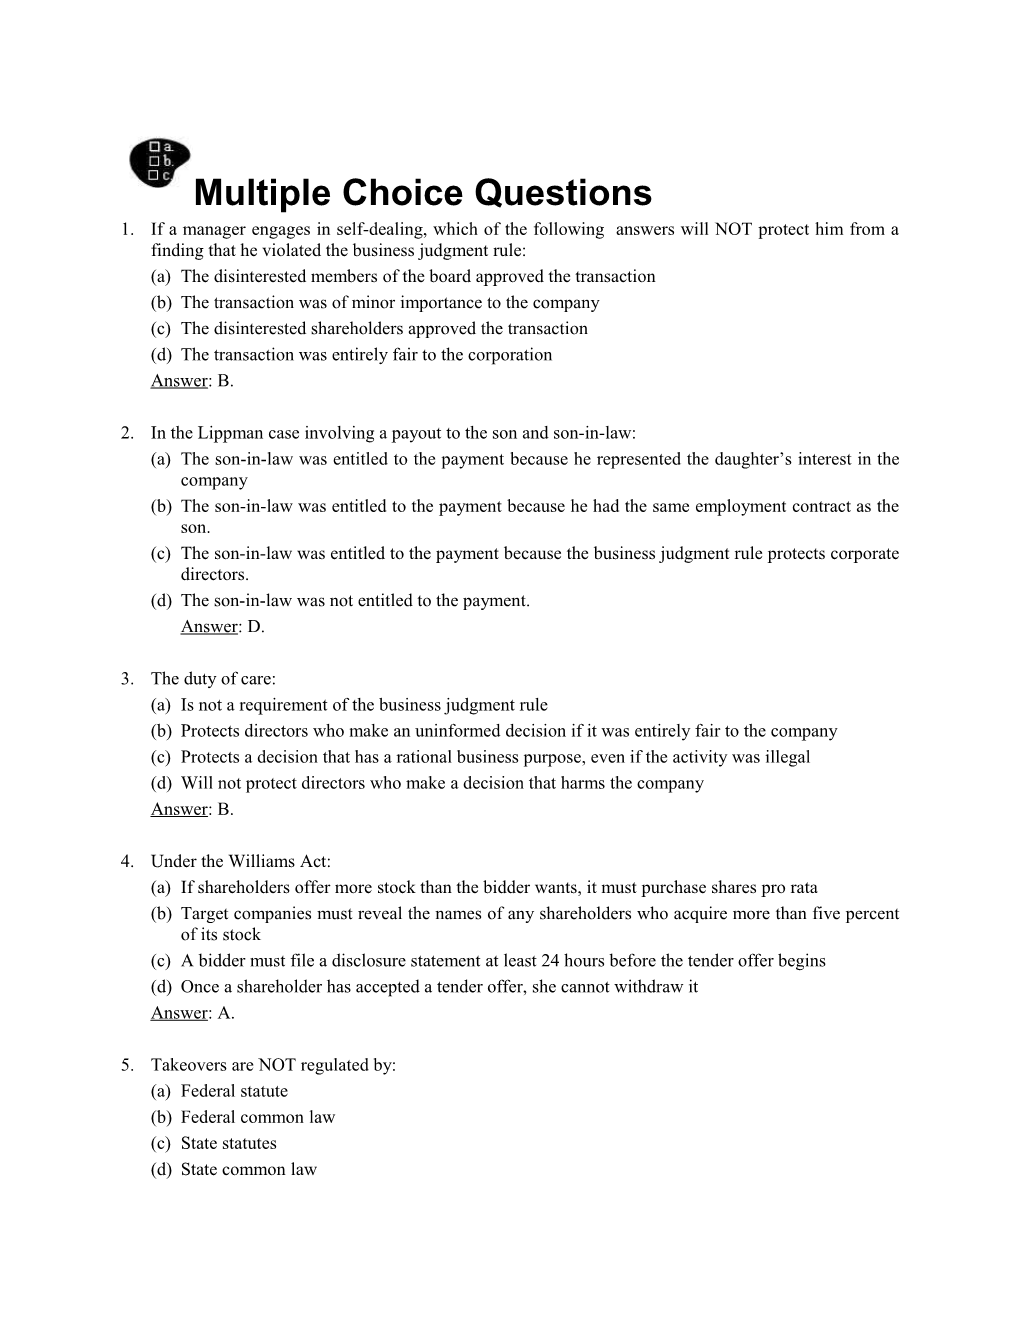 Multiple Choice Questions s19